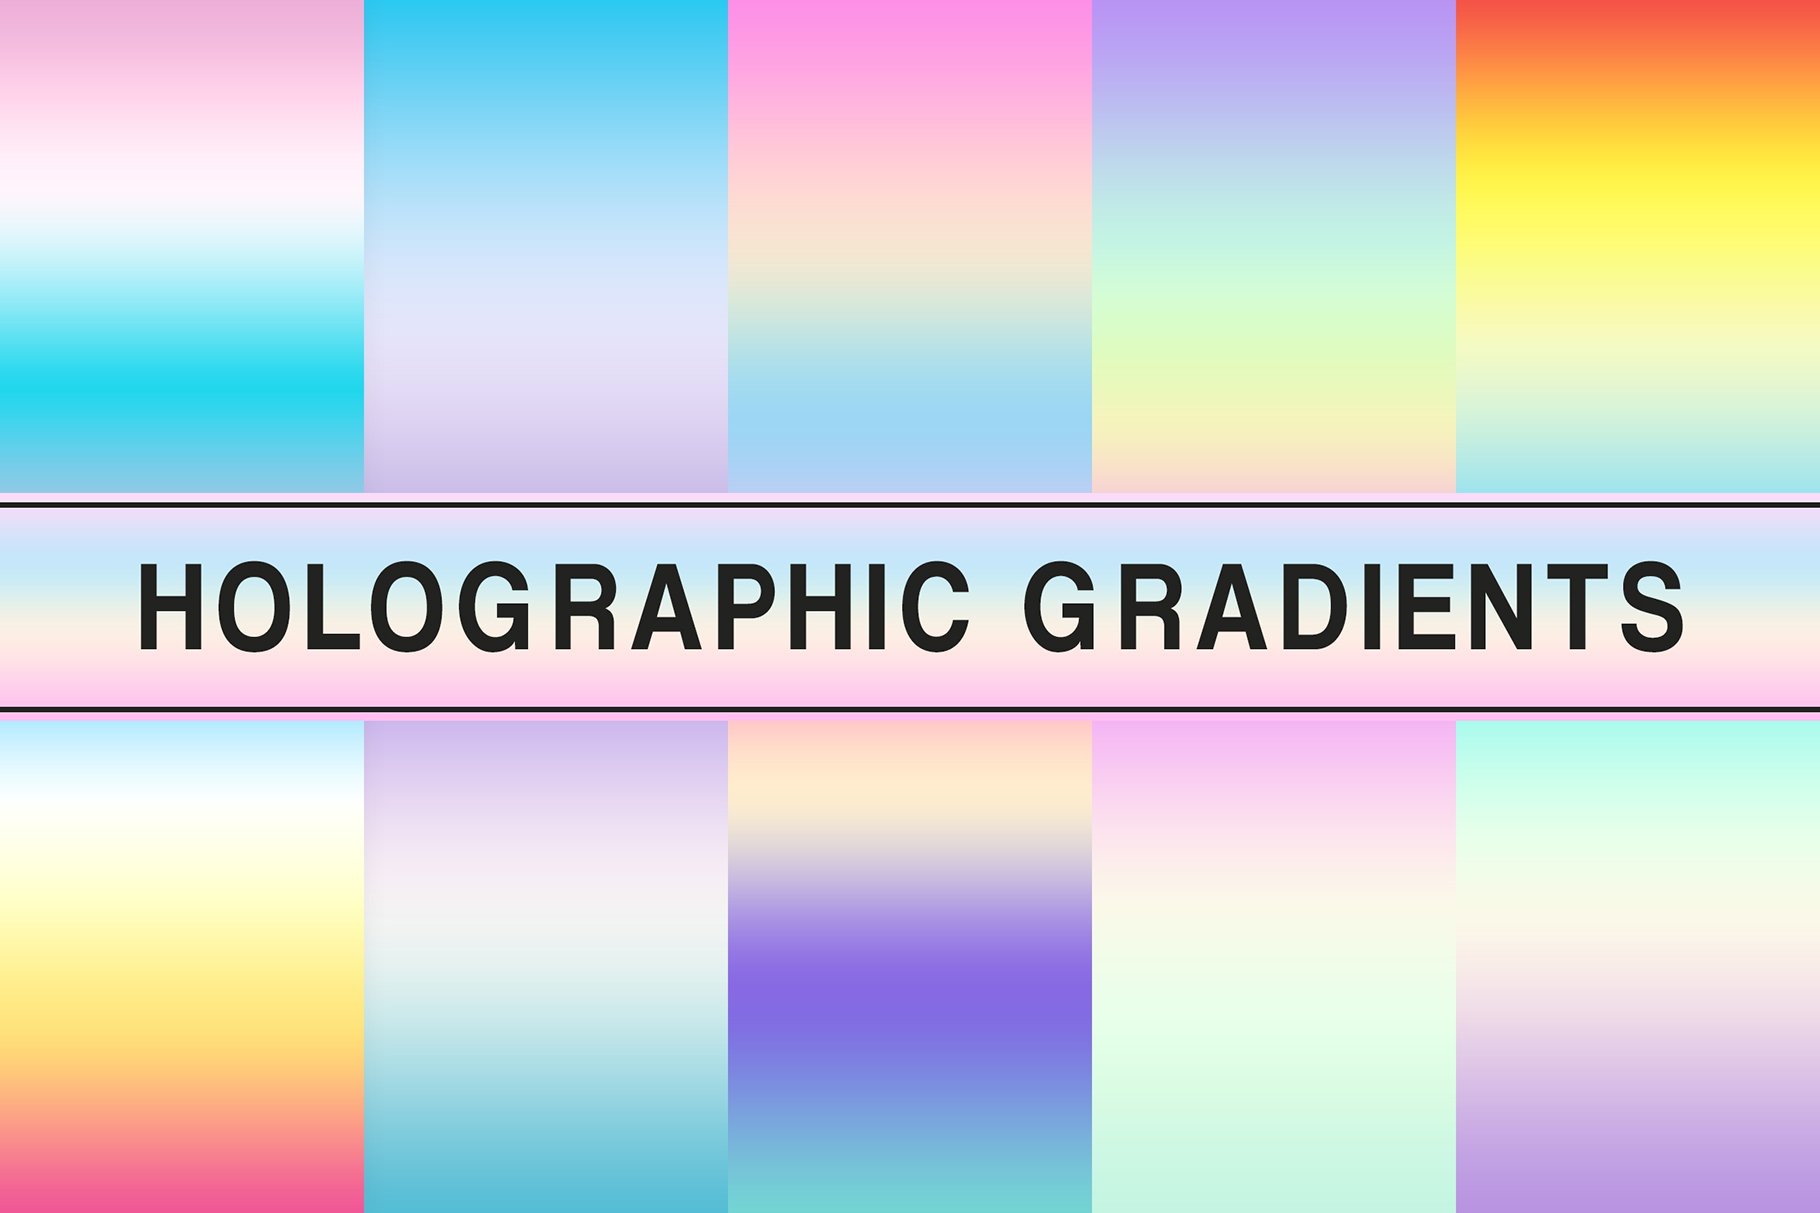 Holographic Gradientscover image.